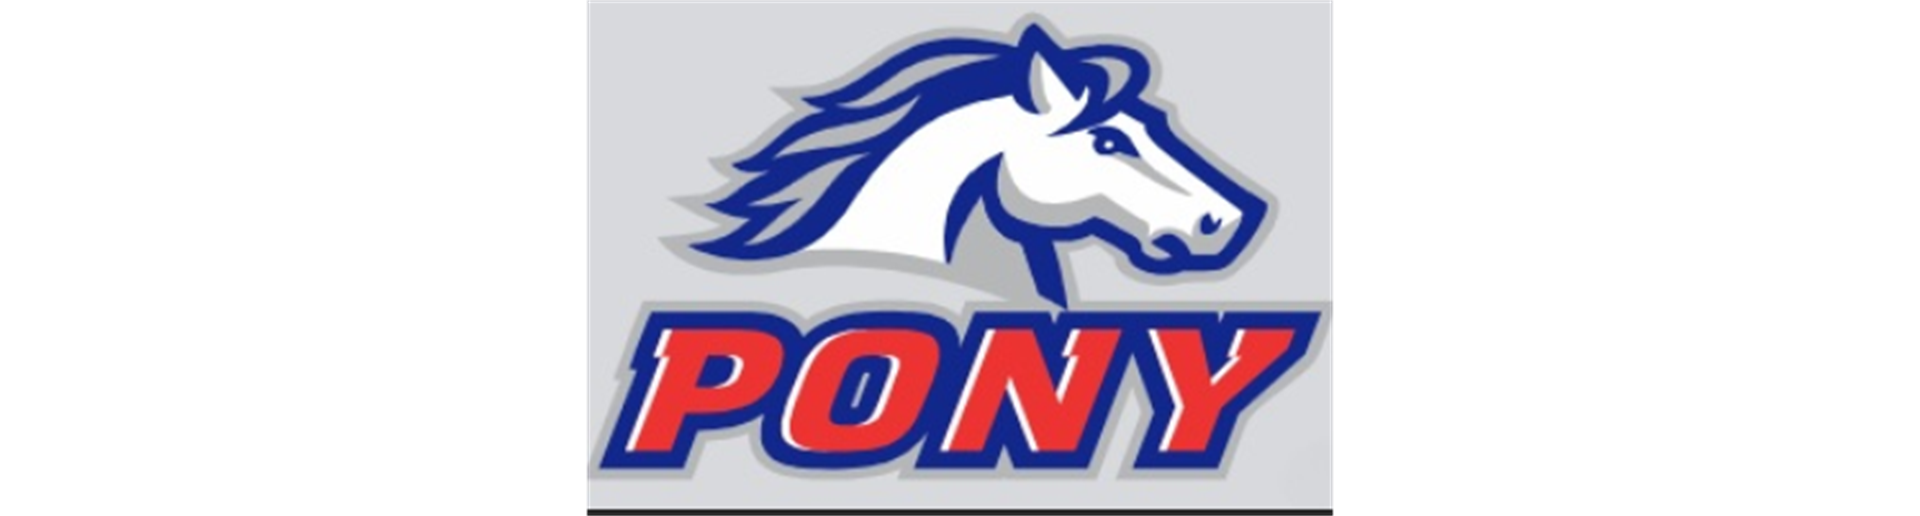 Pony Standings and Schedule